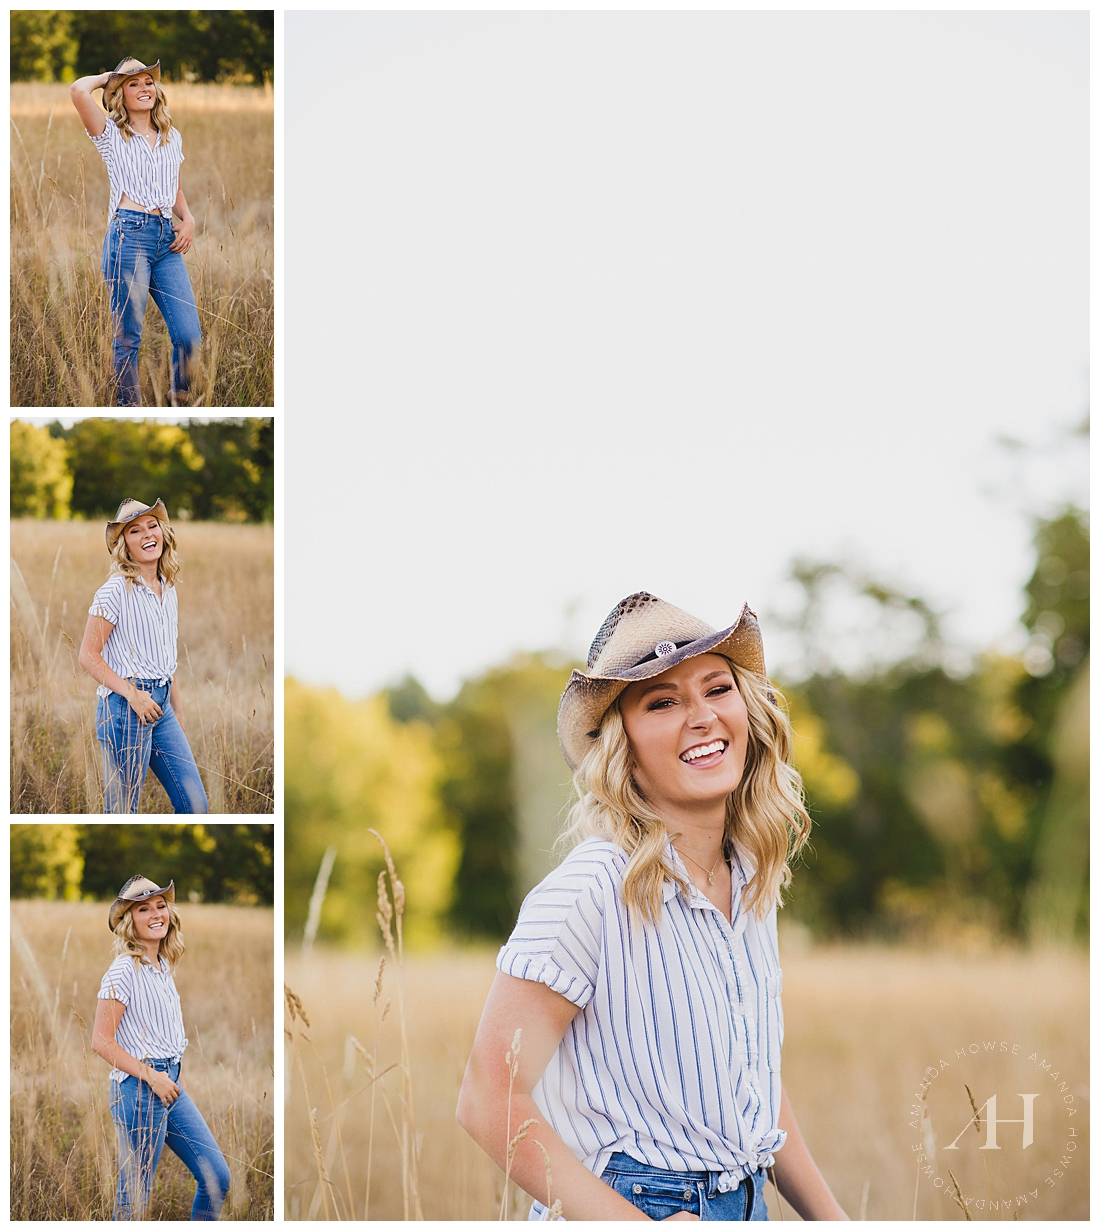 Senior Portraits in a Field with Country Outfit Inspo photographed by Tacoma Senior Photographer Amanda Howse